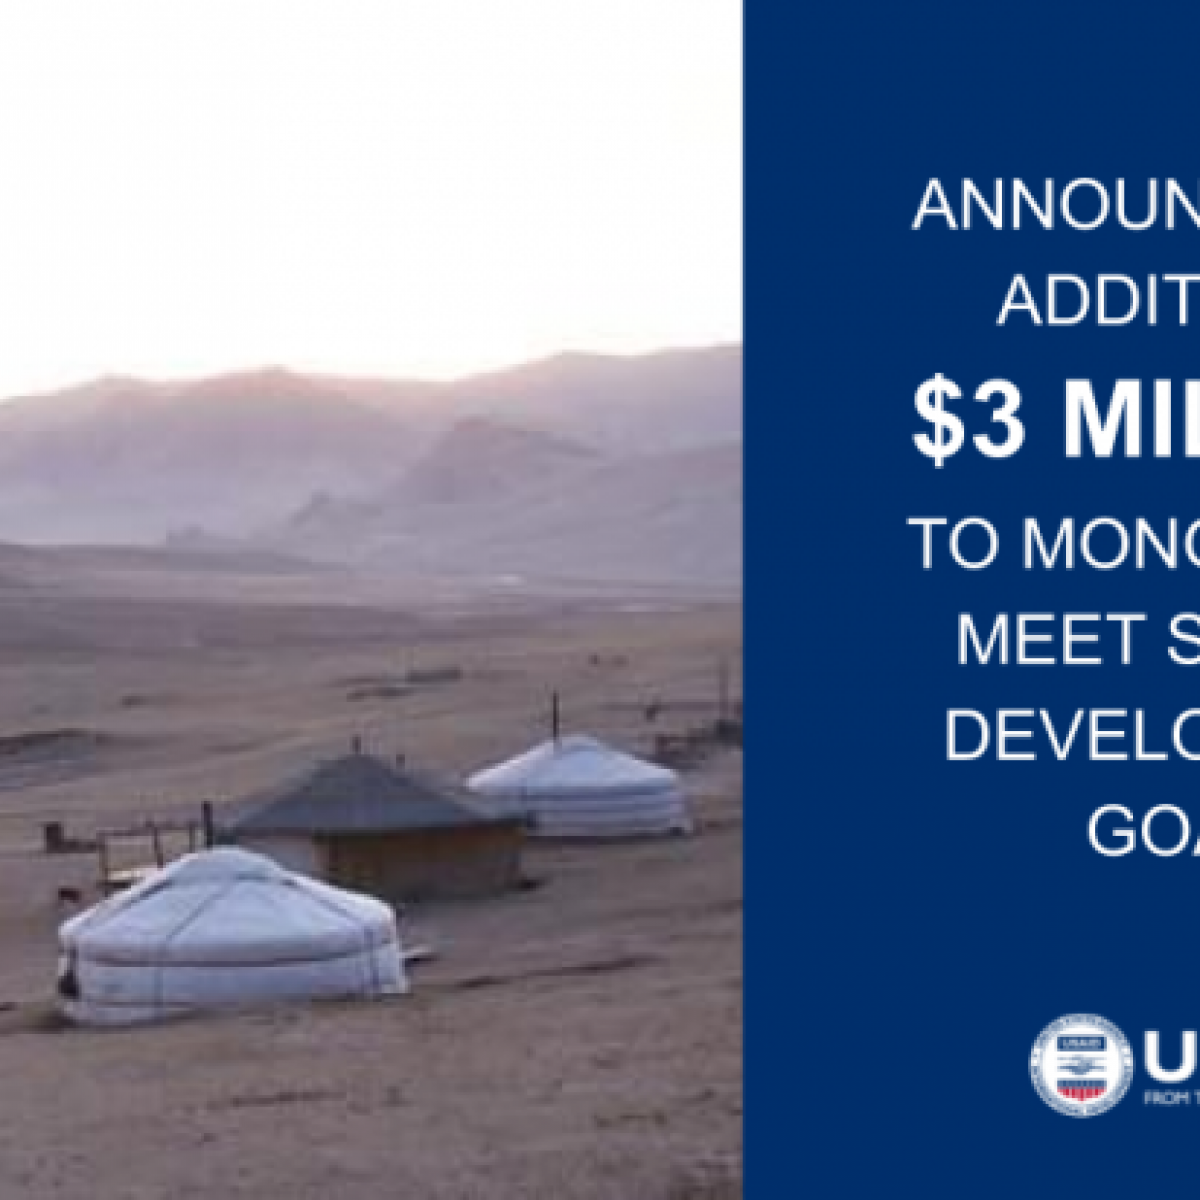 (Left) Three Gers. (Right) USAID Branded text that reads "Announcing an additional $3 million to Mongolia to meet shared development goals"